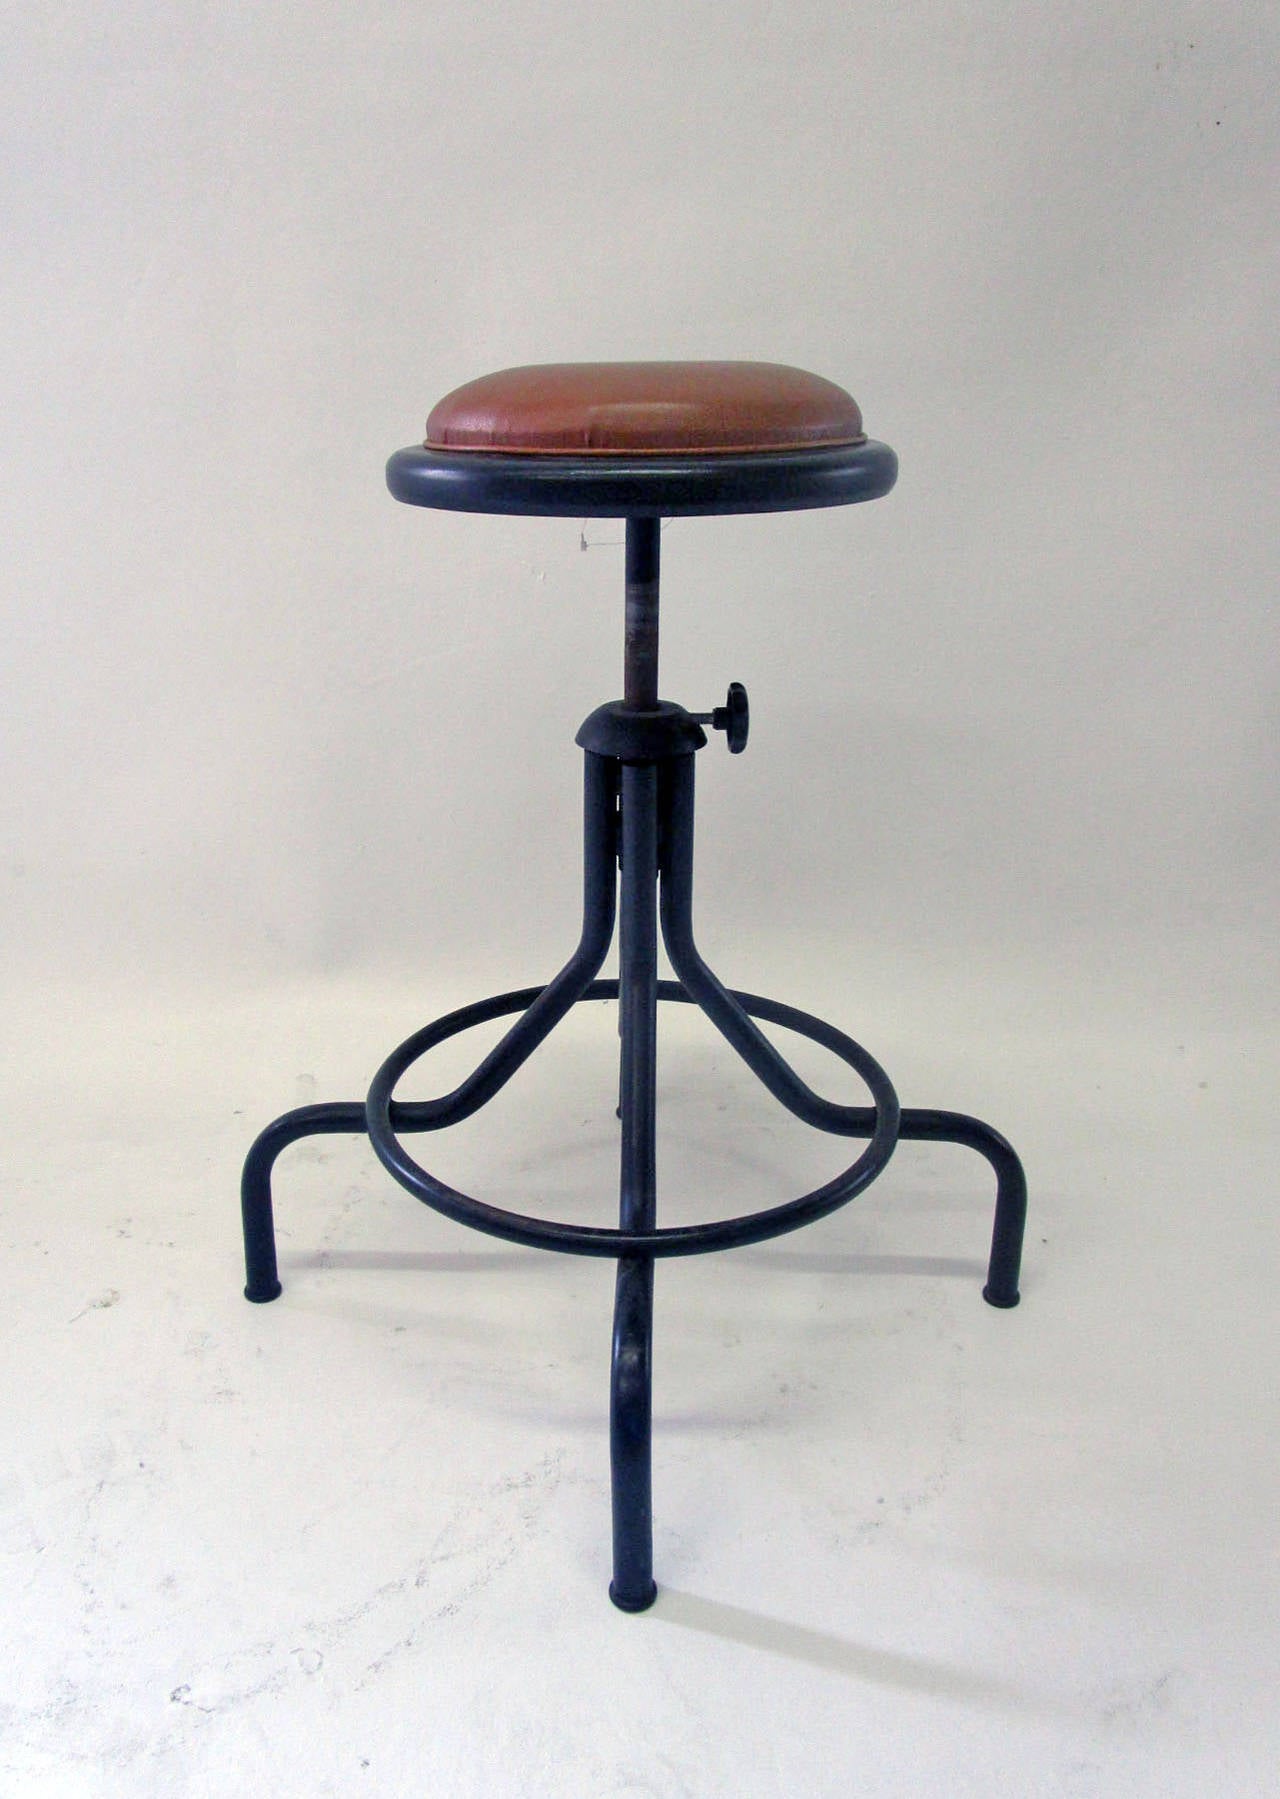 American Industrial Style Set of Four Adjustable Industrial Stool with Leather Seat